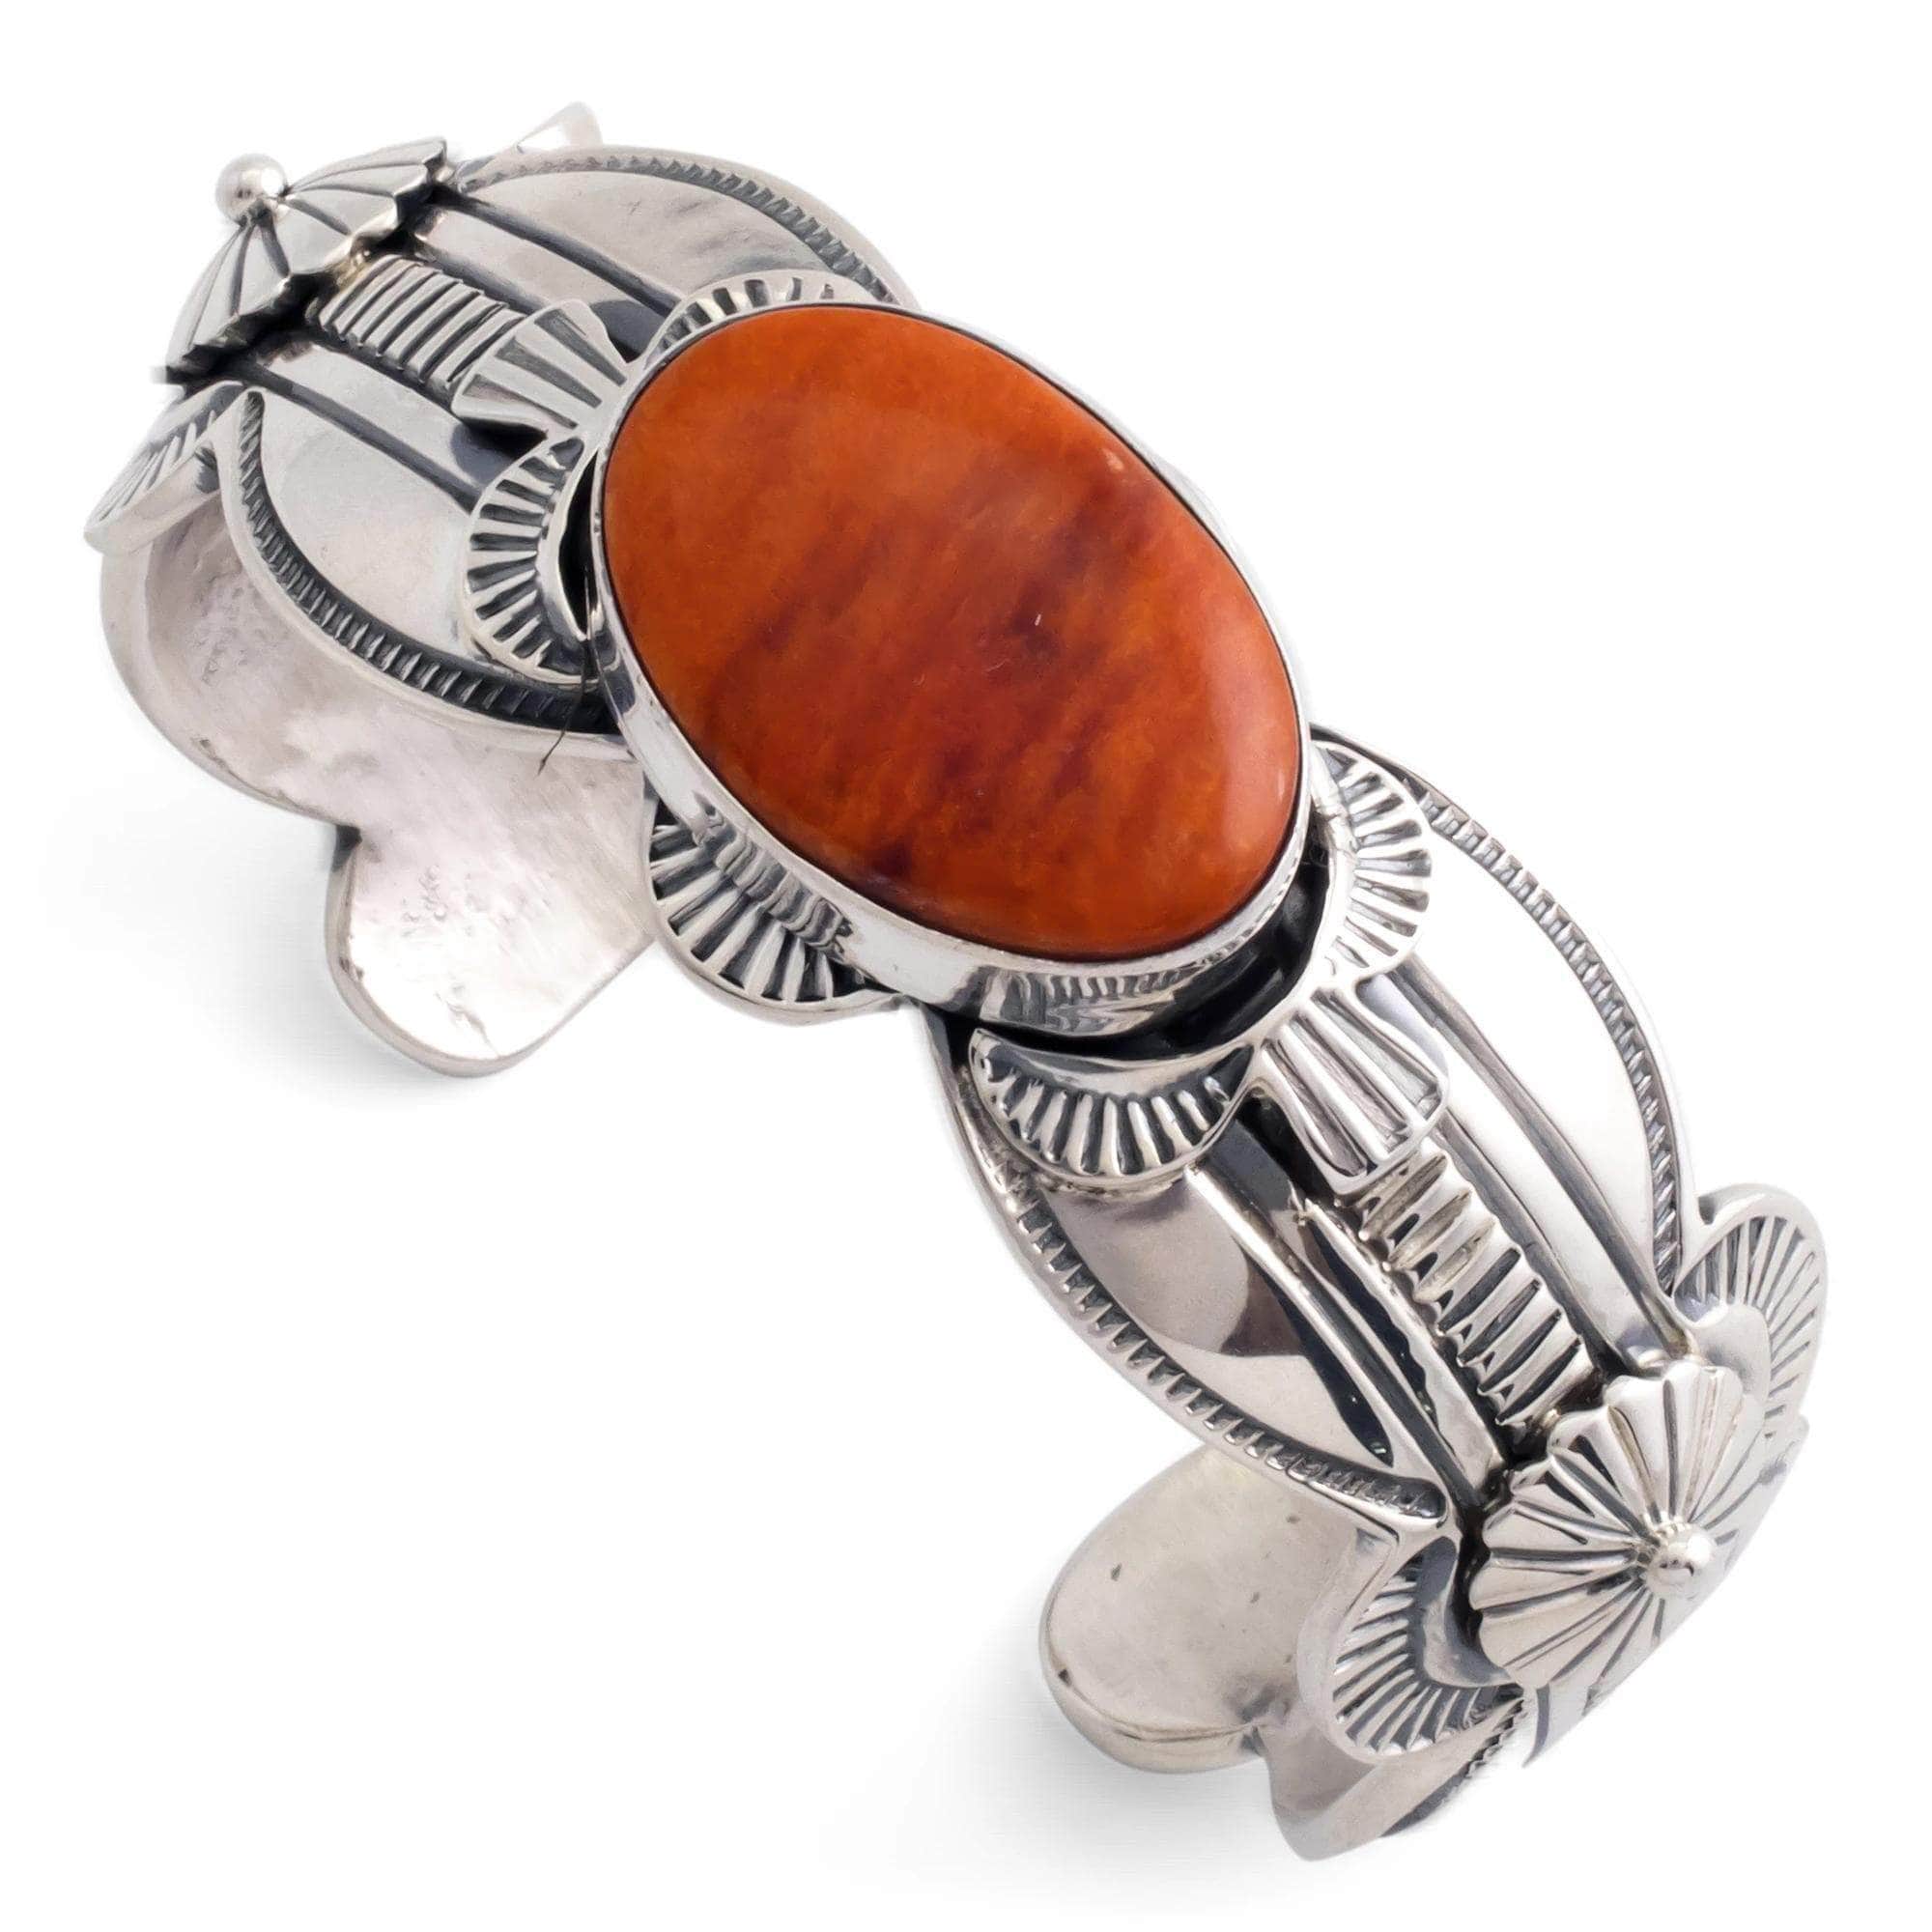 Kalifano Native American Jewelry Danny Clark Orange Spiny Oyster Shell USA Native American Made 925 Sterling Silver Cuff NAB3000.003